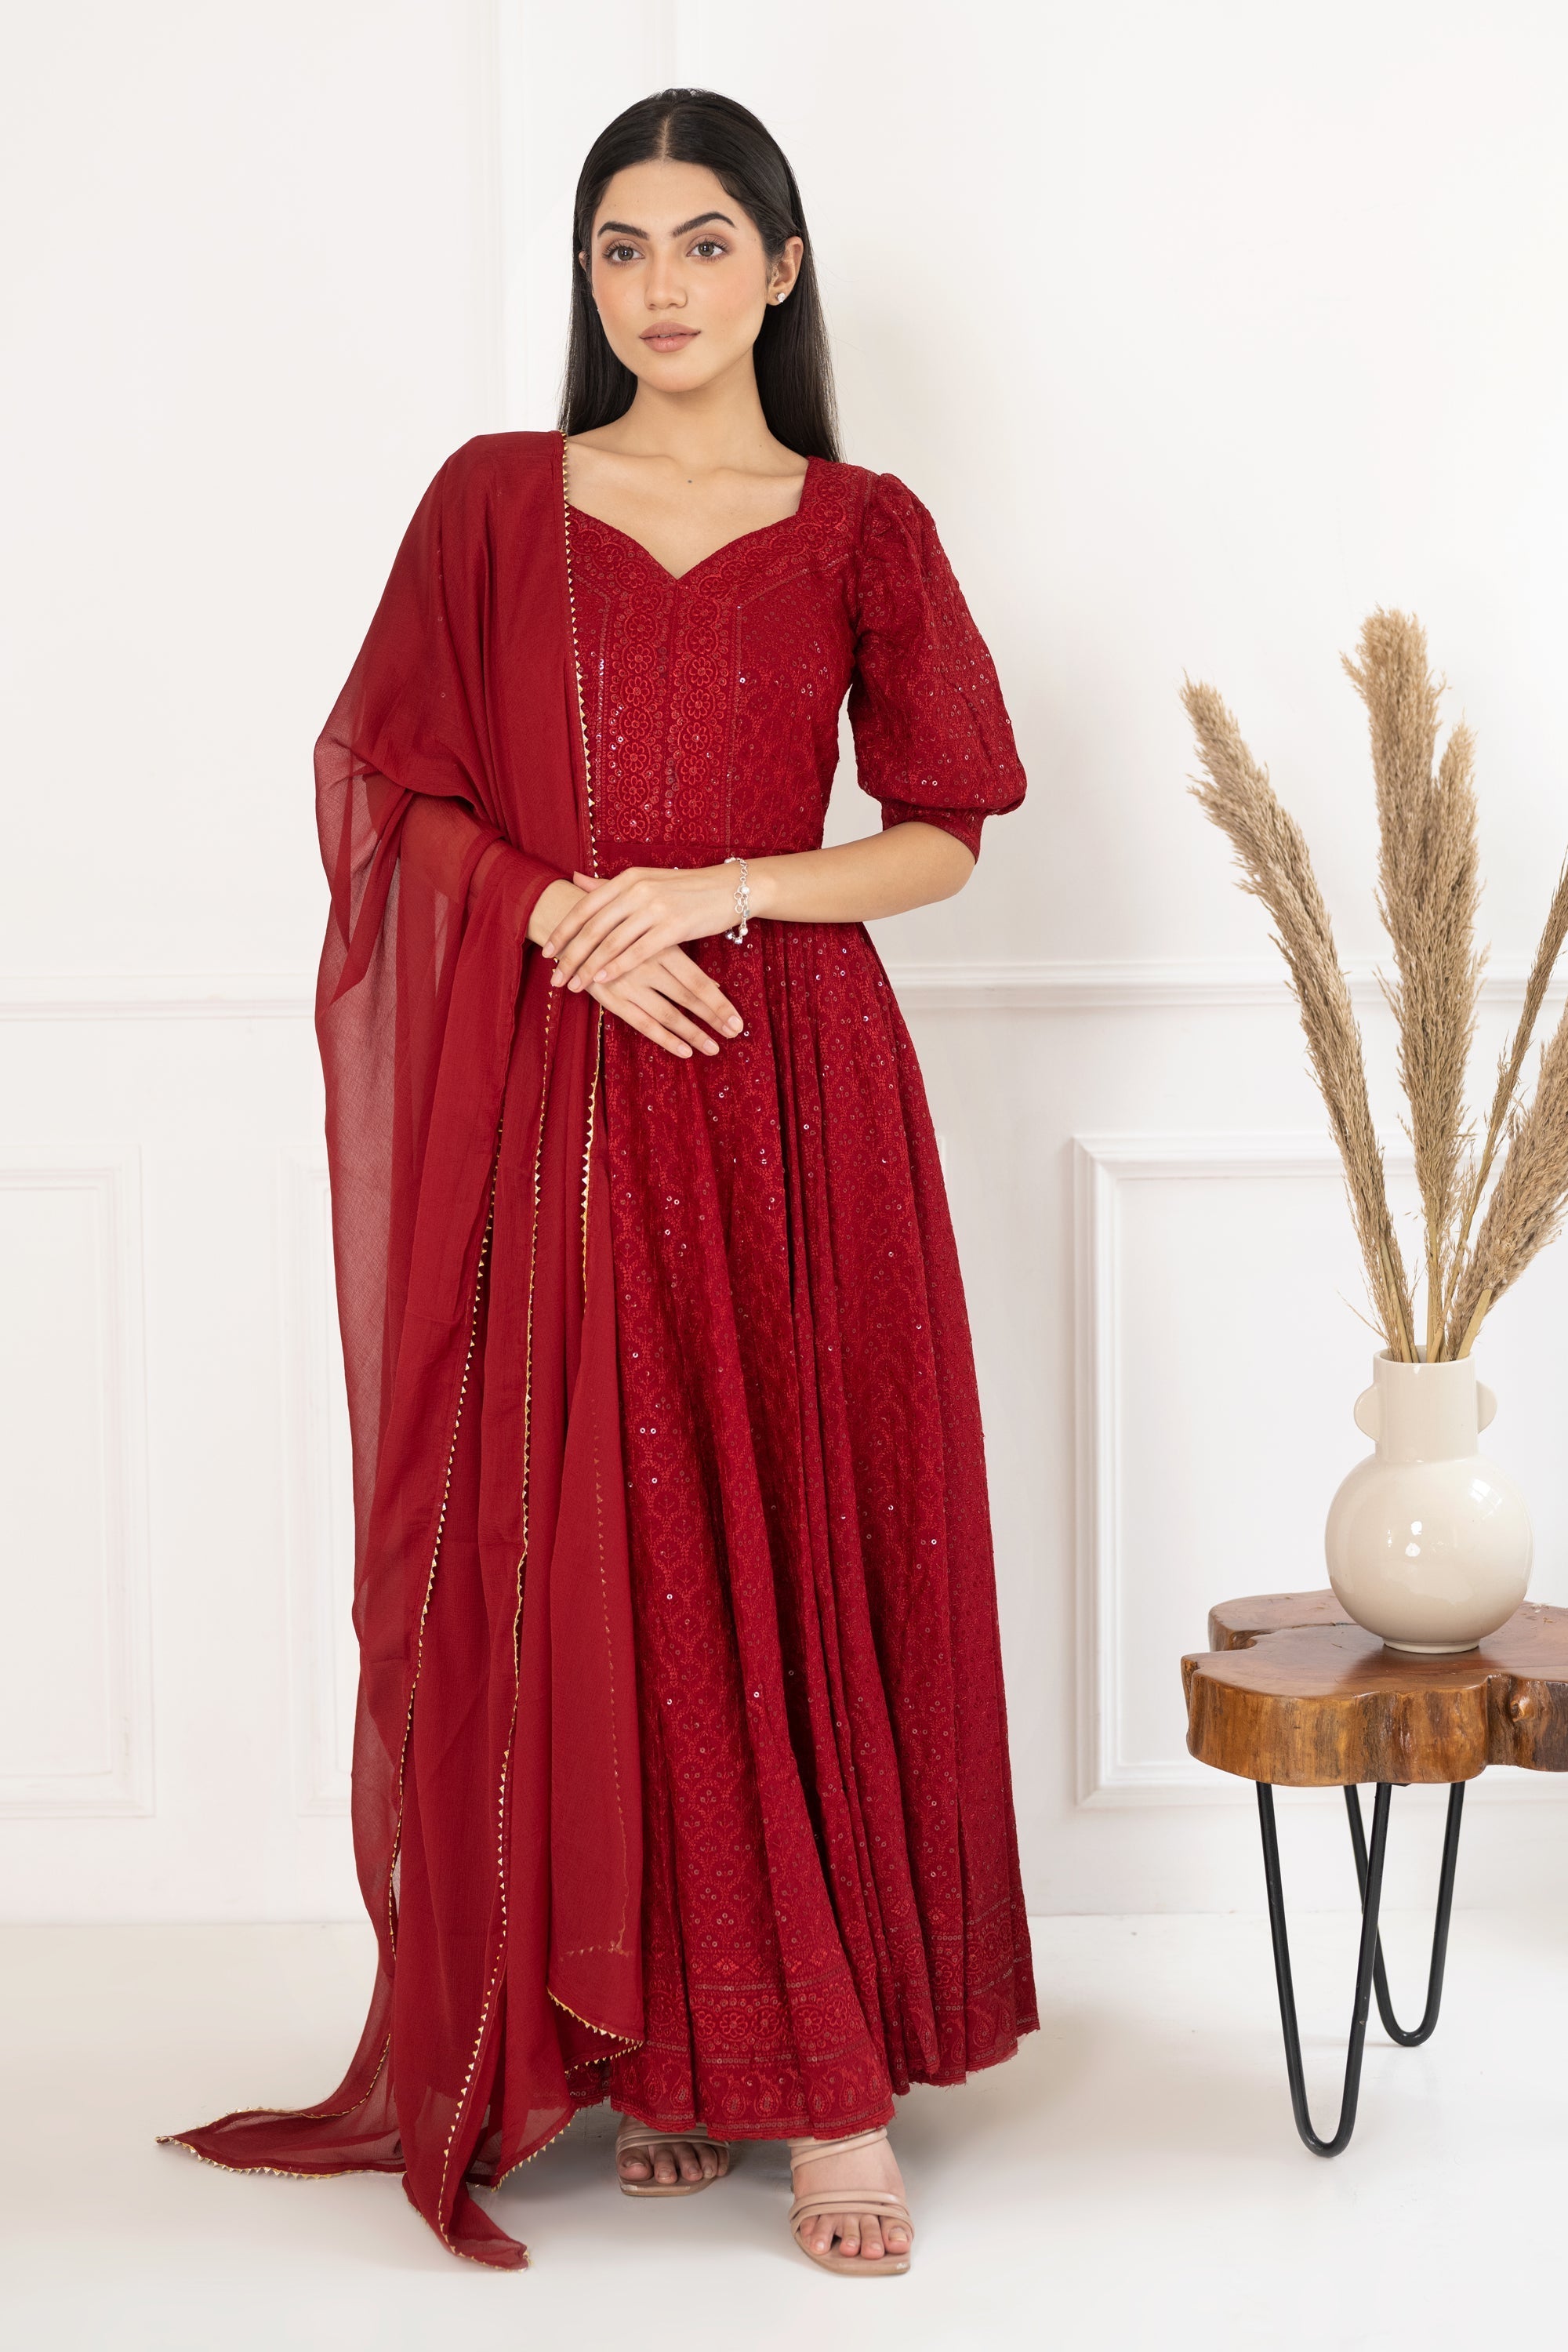 Women's Red Sequin Embroidered Dress With Dupatta (2 Pc Set)- Final Clearance Sale